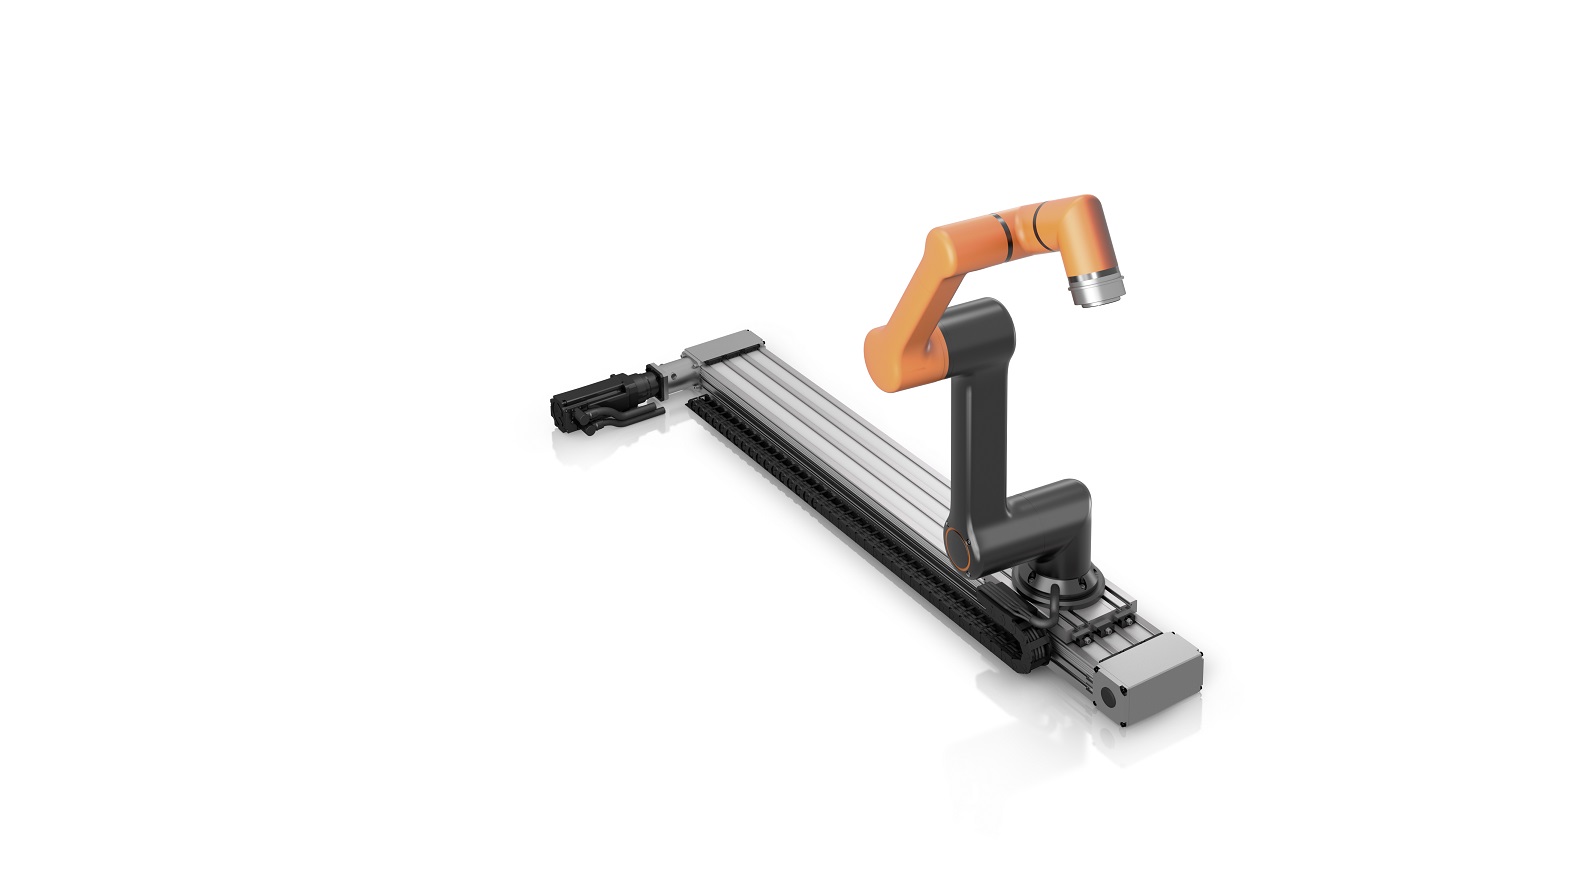 Linear axis actuator enables cobot travel paths of up to 18 metres